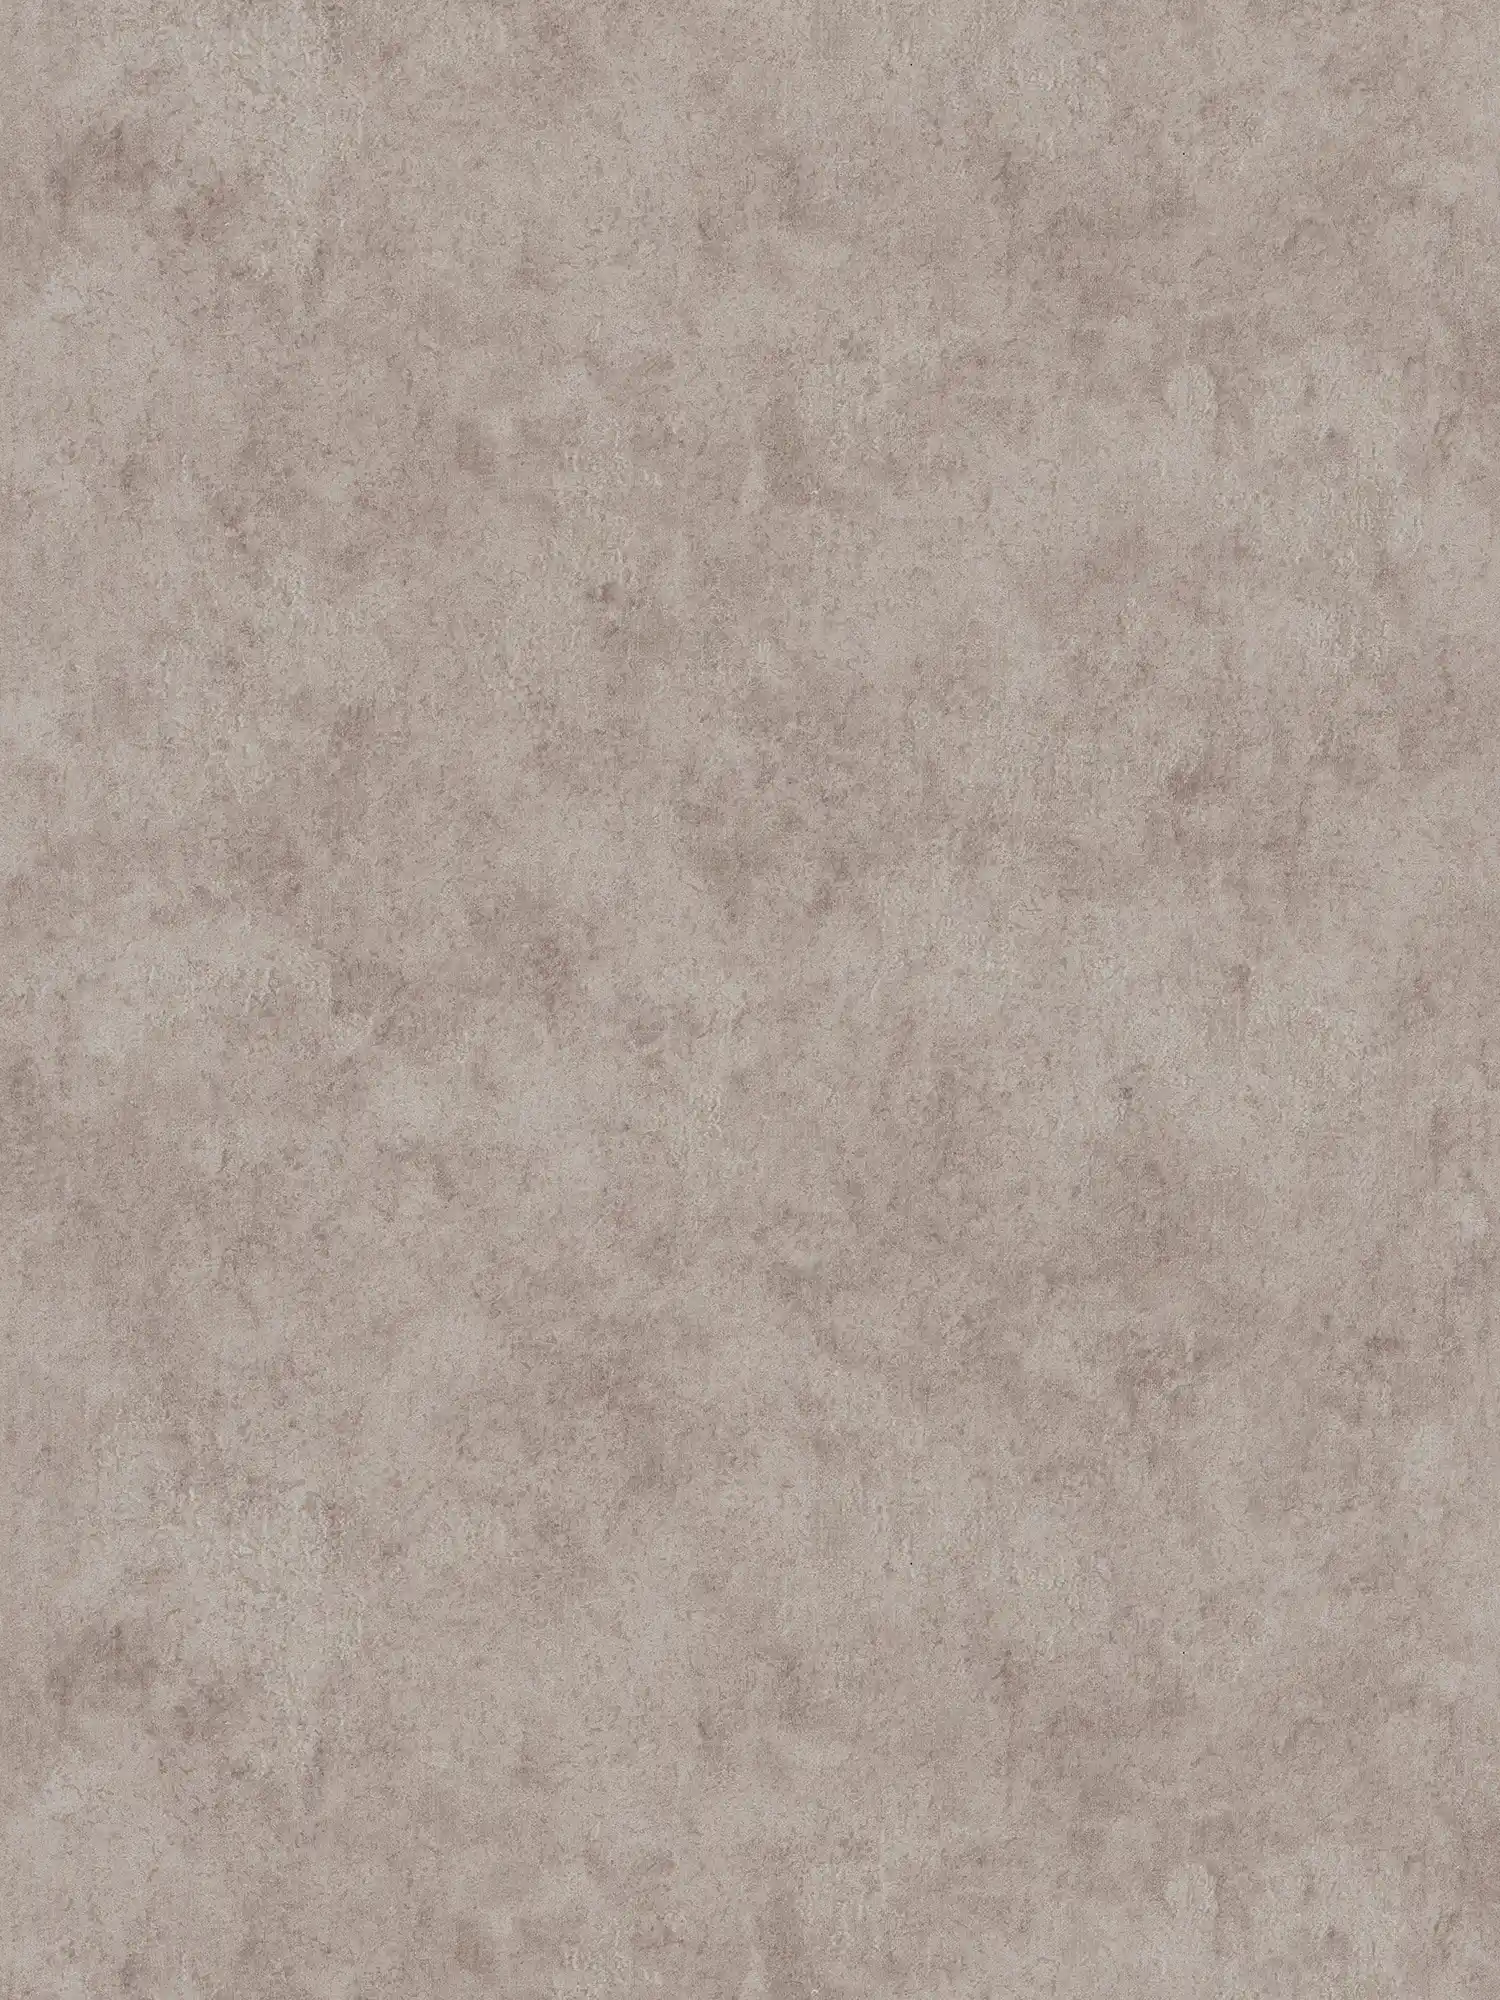 Plain wallpaper in washed out vintage style - beige
